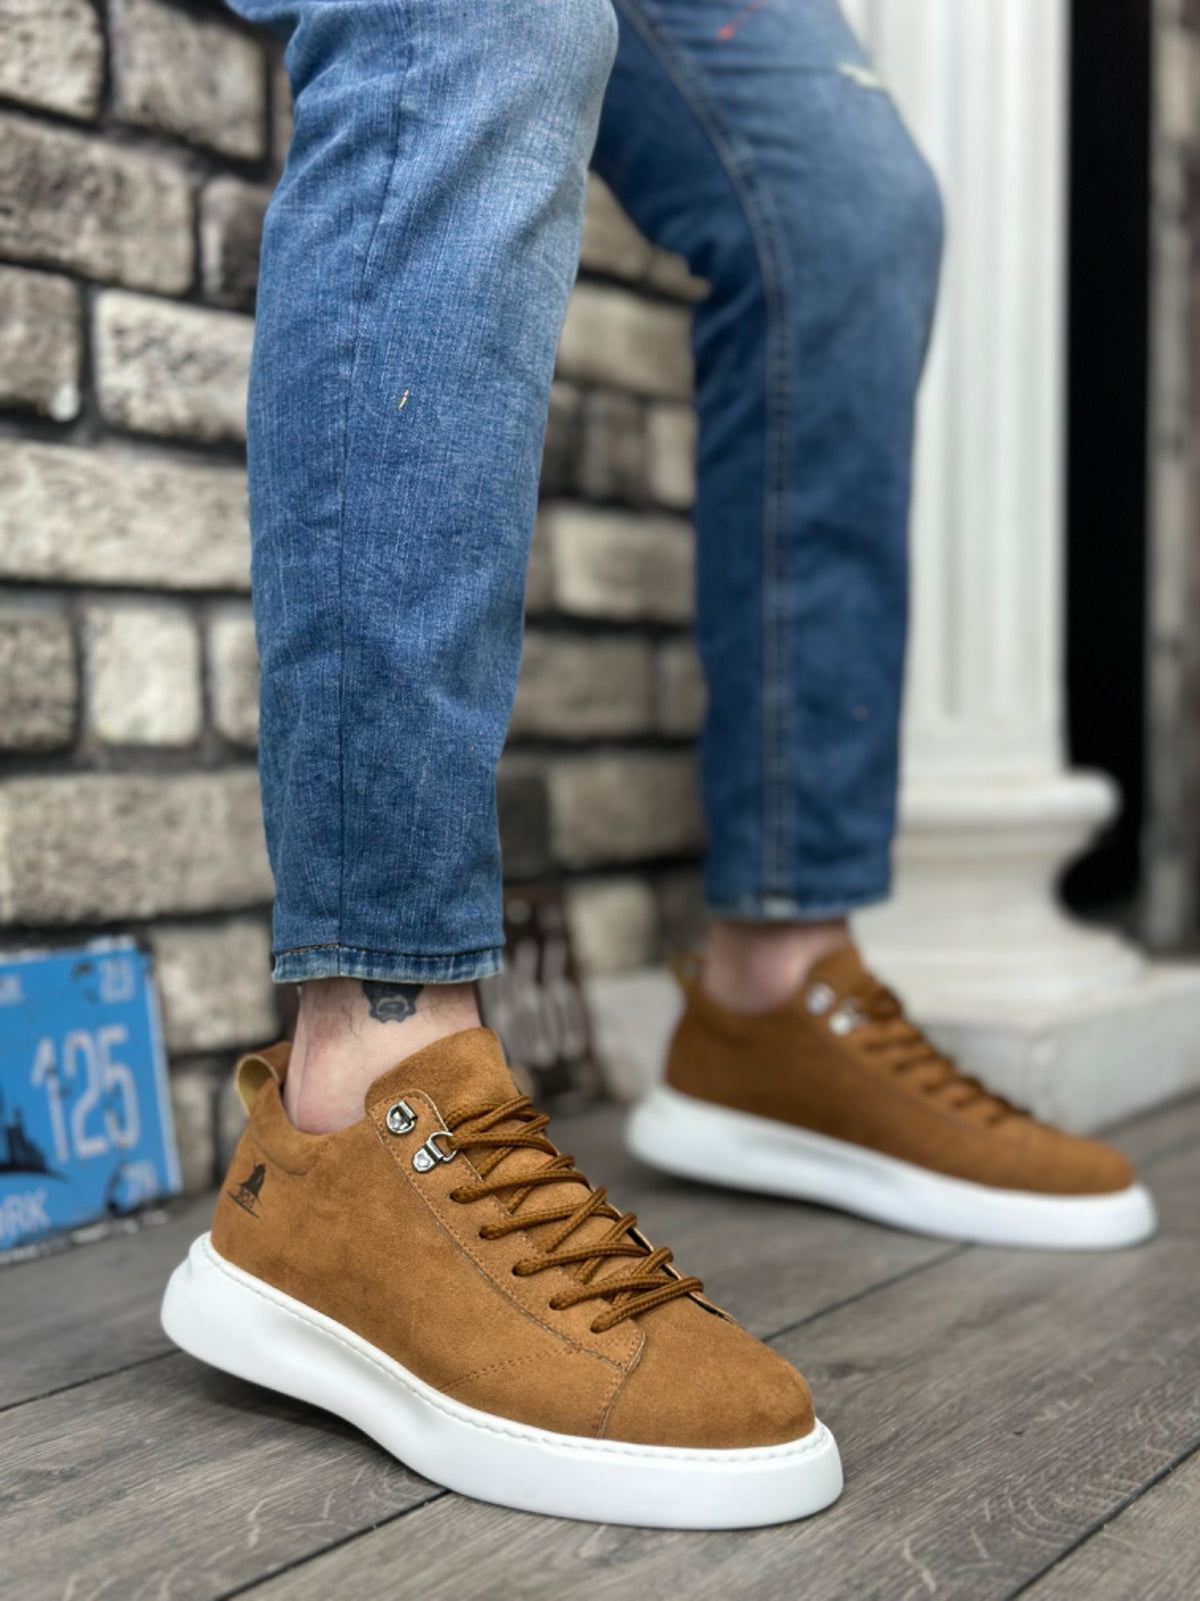 BA0331 Lace-Up Men's High Sole Tan Suede White Sole Sports Shoes - STREETMODE ™